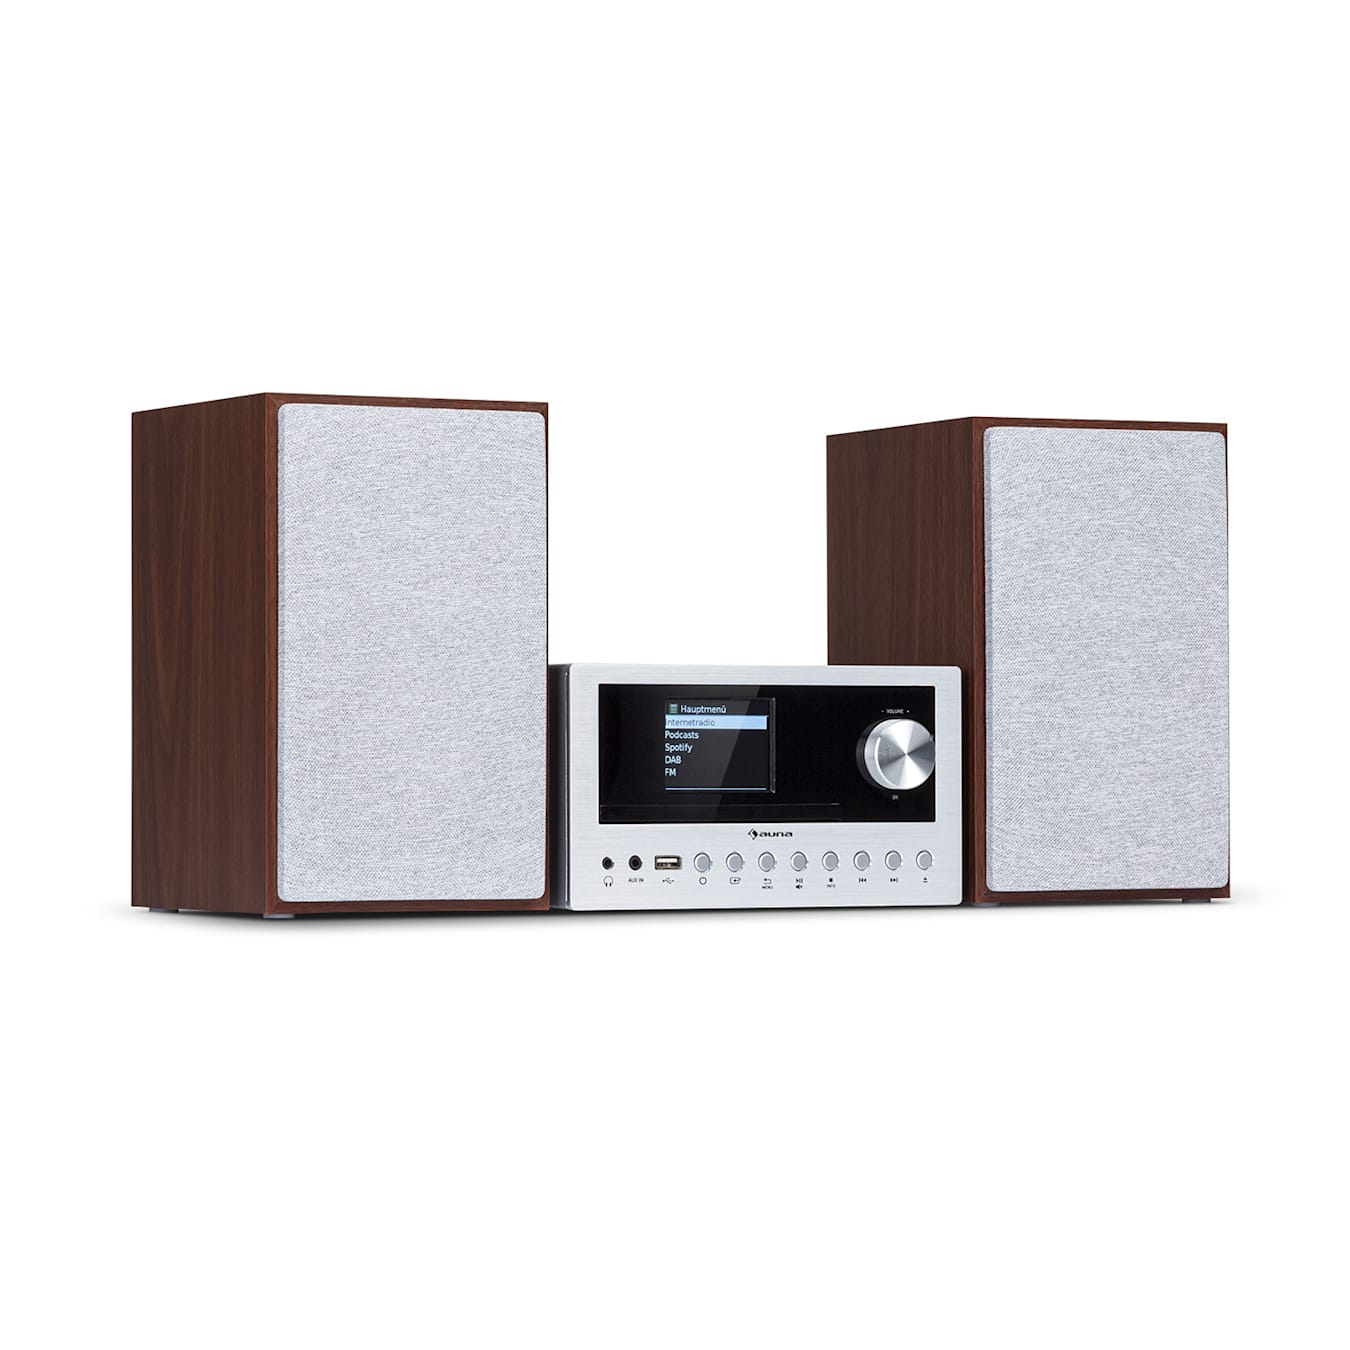 Connect System stereo system | 40 watt max. | 2 x 15 watt RMS speakers |  internet/DAB+/FM radio | CD player | Bluetooth | Spotify Connect | USB  connection | multiroom function | app control (UNDOK) | Silver